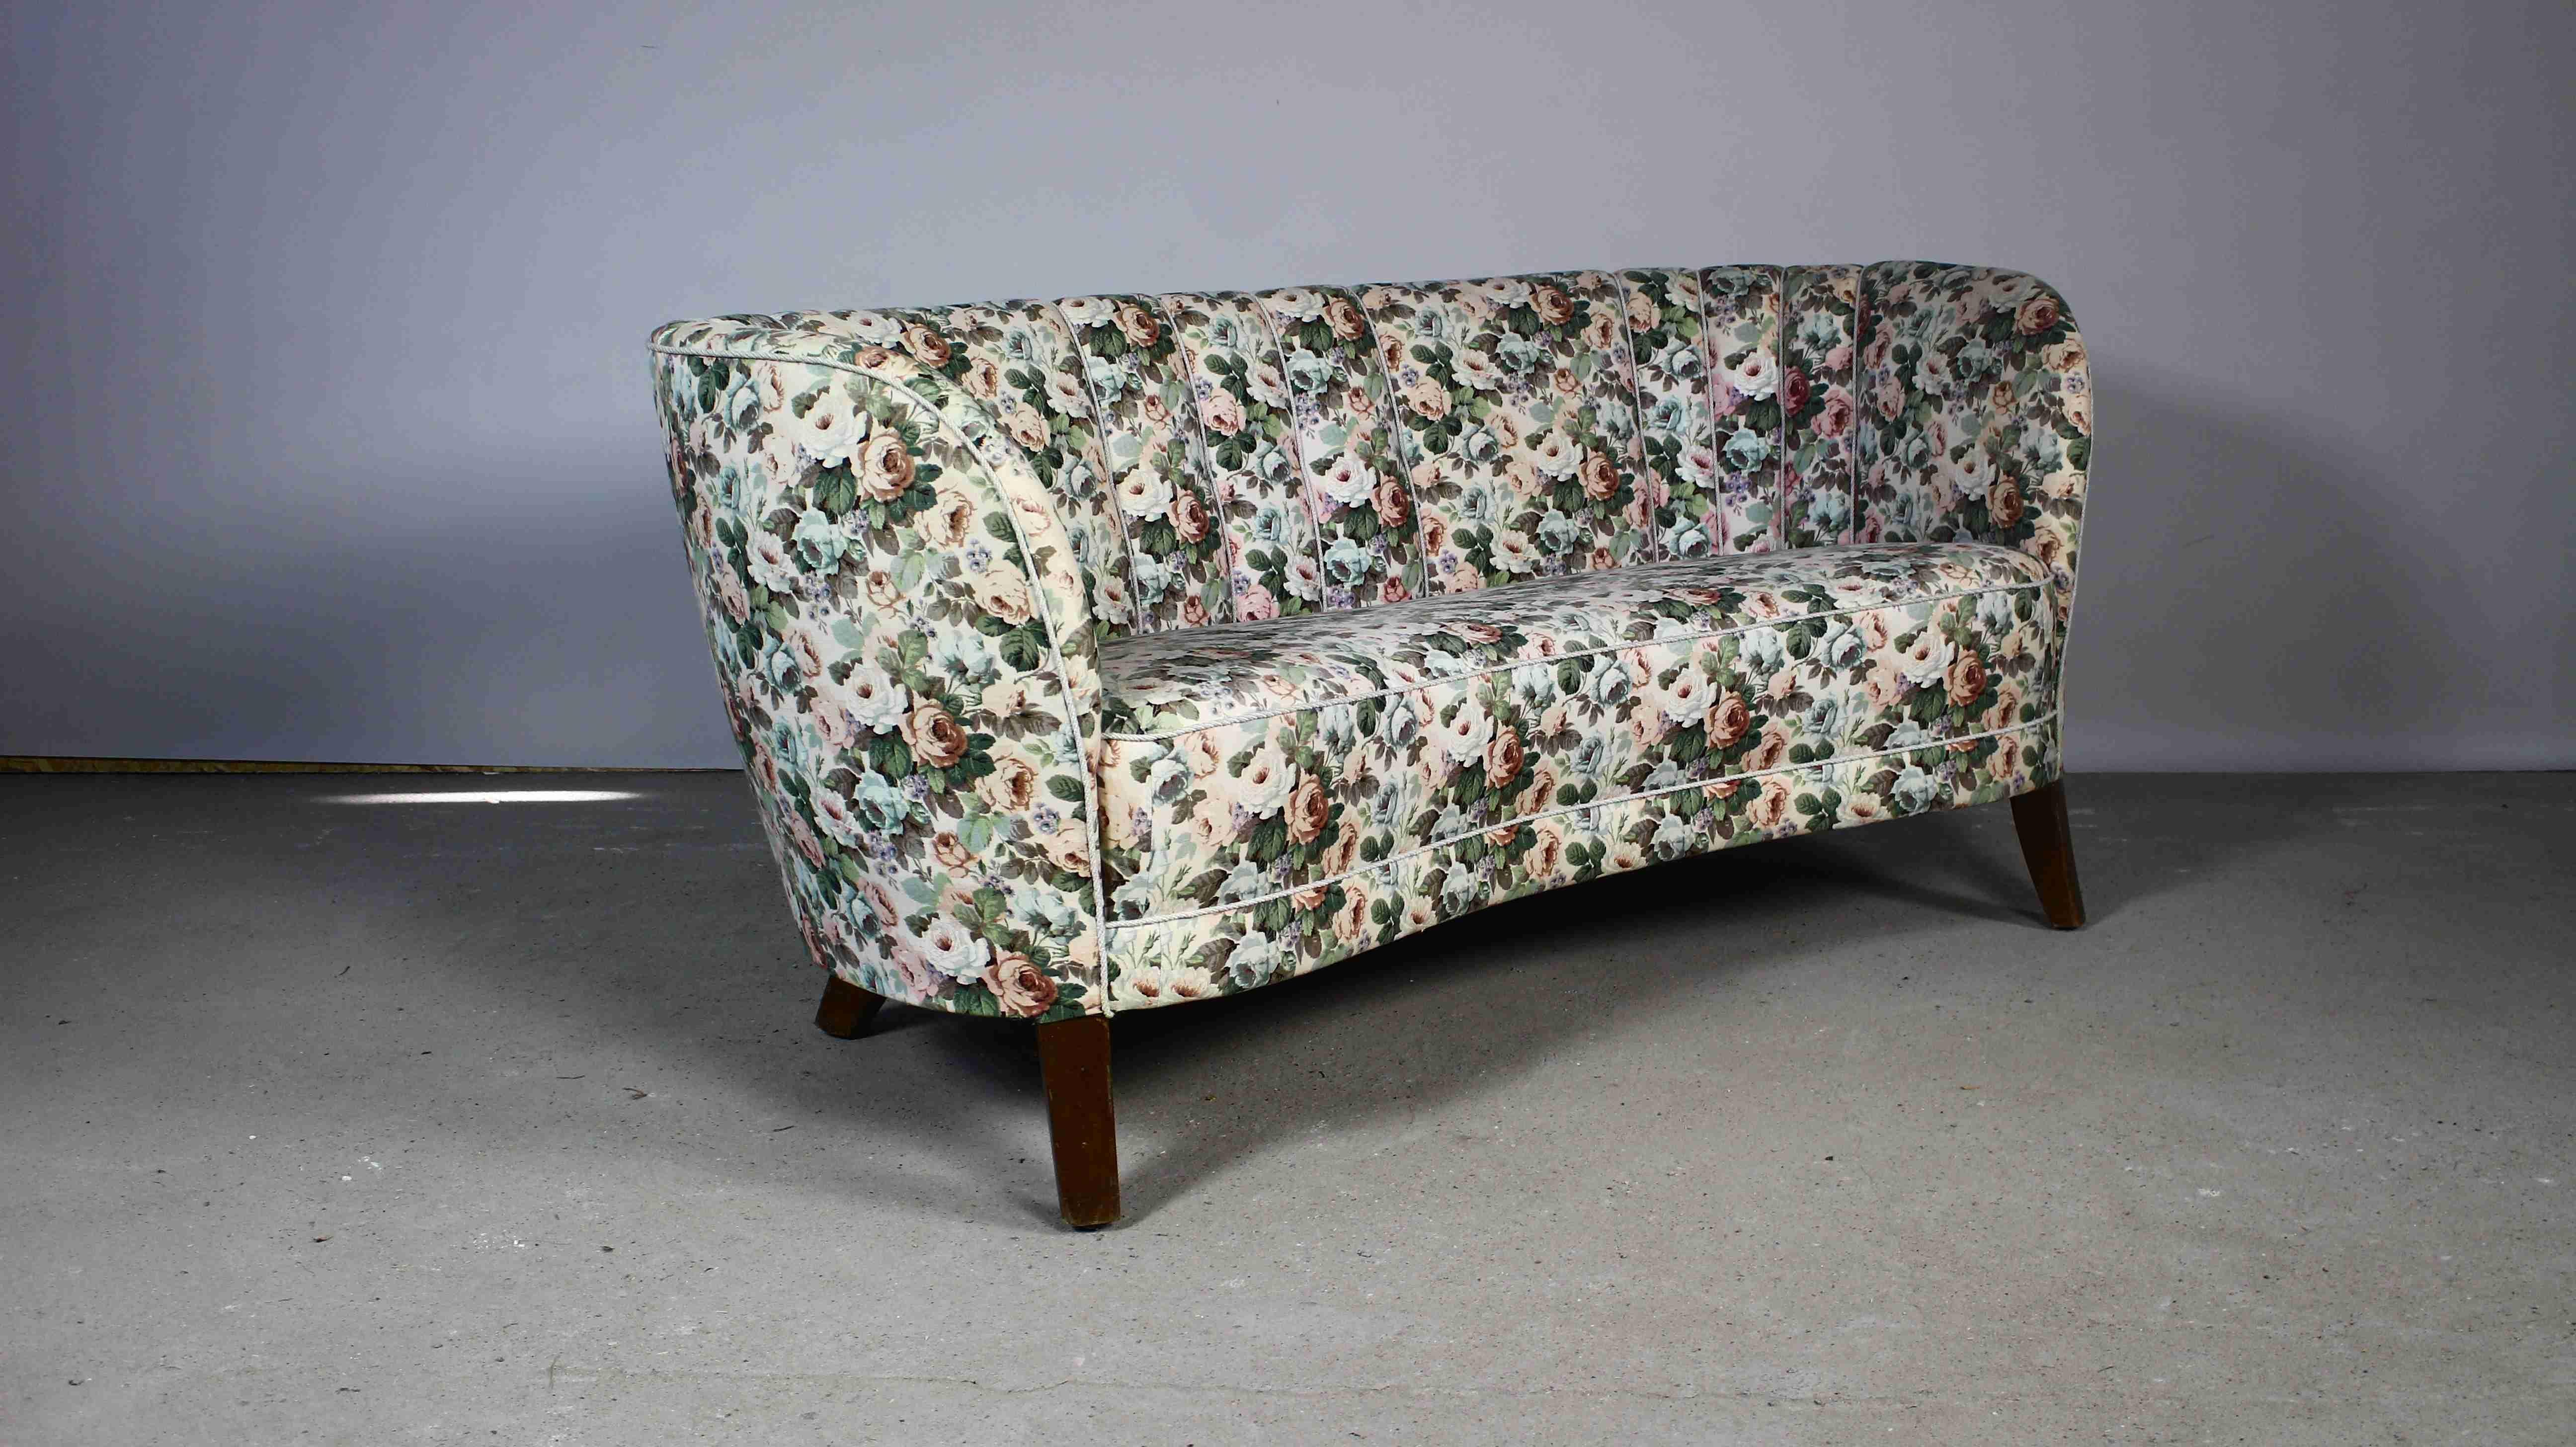 This early 1950s sofa is by Slagelse Mobelvaerk, made in the manner of Modernist Danish architect, Flemming Lassen.
The defined lines that characterize Danish design curve inward in this sofa, embracing the sitters.